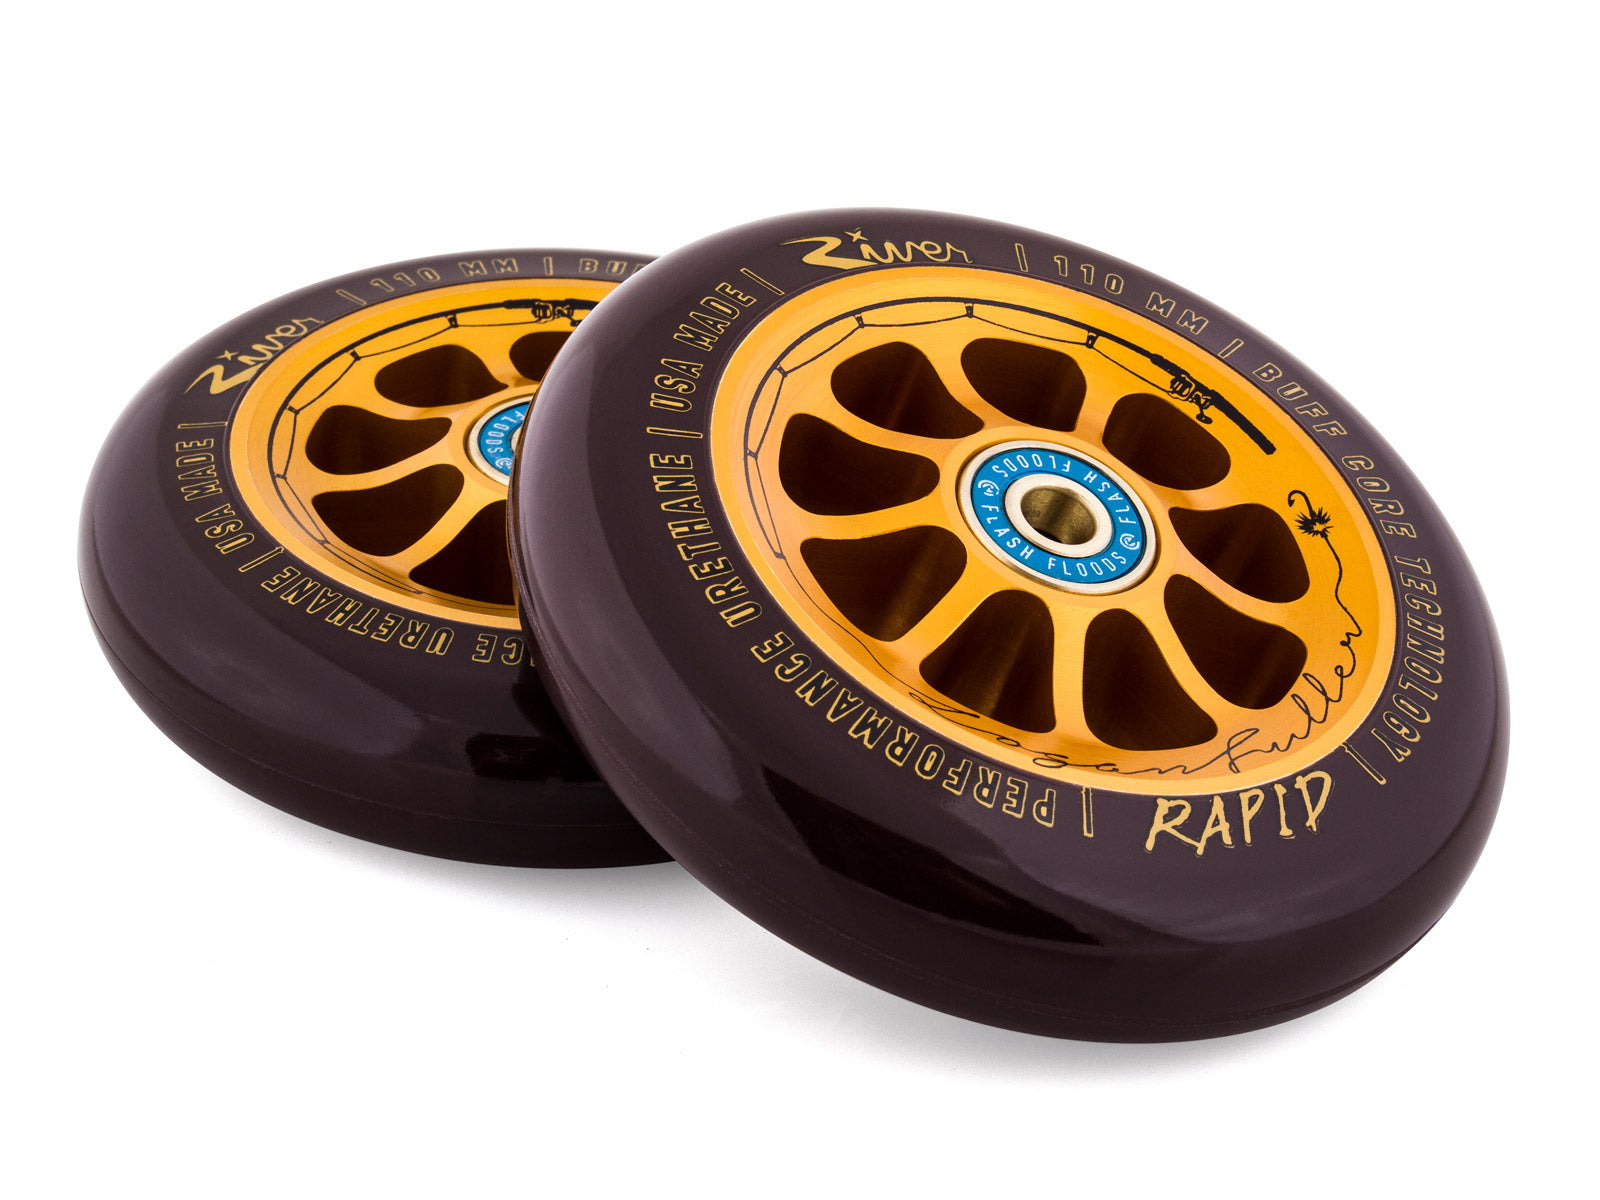 River The Angler Rapids Logan Fuller Sig. (PAIR) - Scooter Wheels The Pair